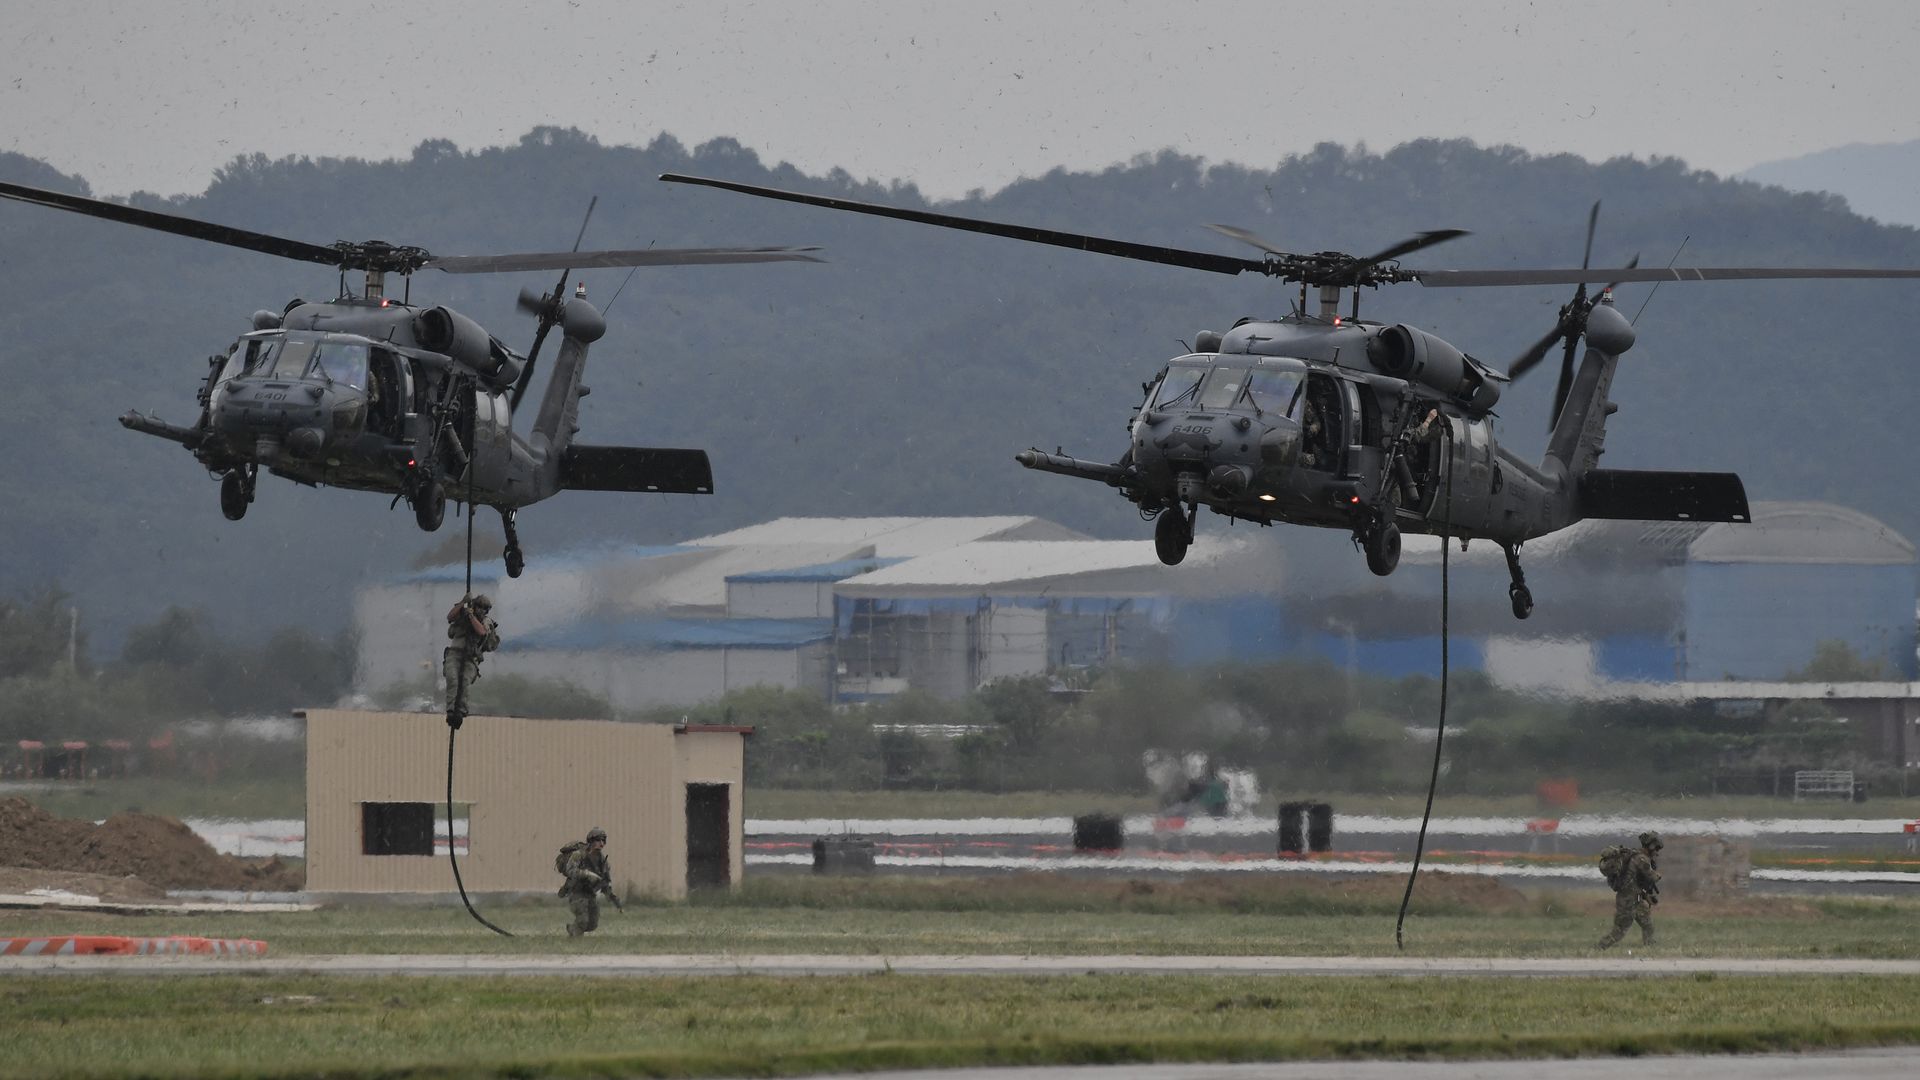 US soldiers participate in a military tactical demonstration during "Air Power Day" preview at US Osan Air Base in Pyeongtaek on September 20